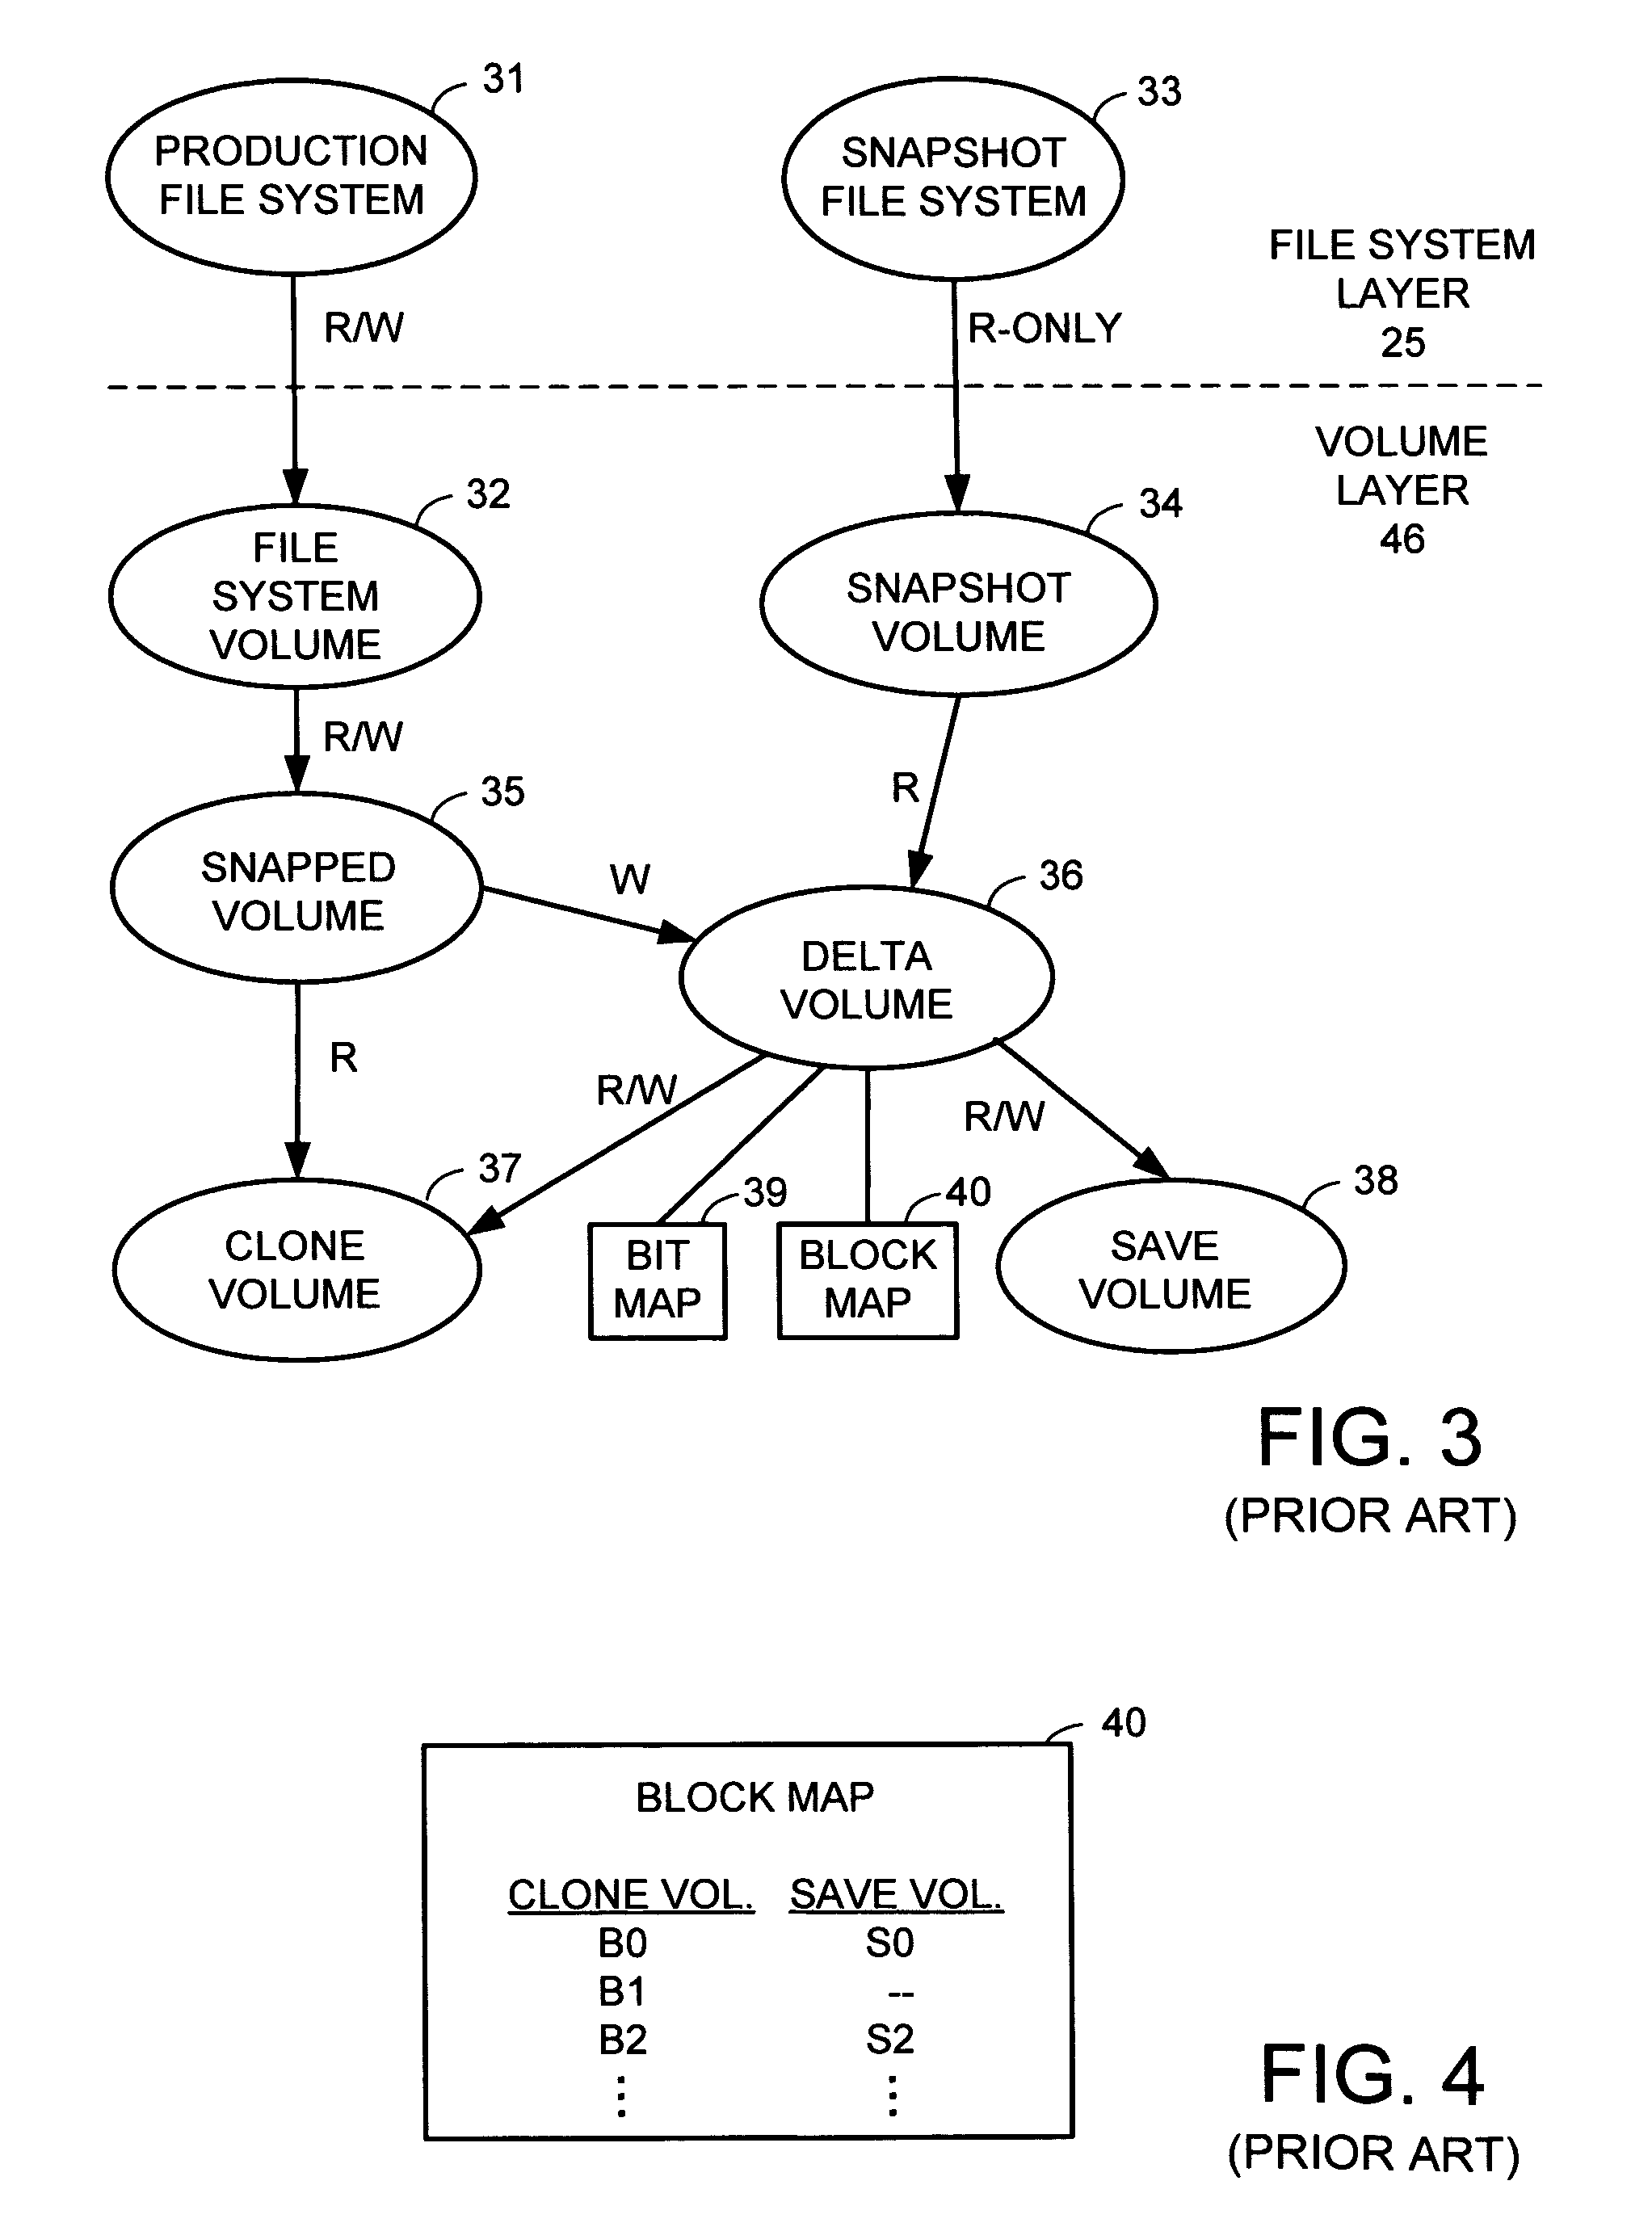 Client-server protocol for directory access of snapshot file systems in a storage system